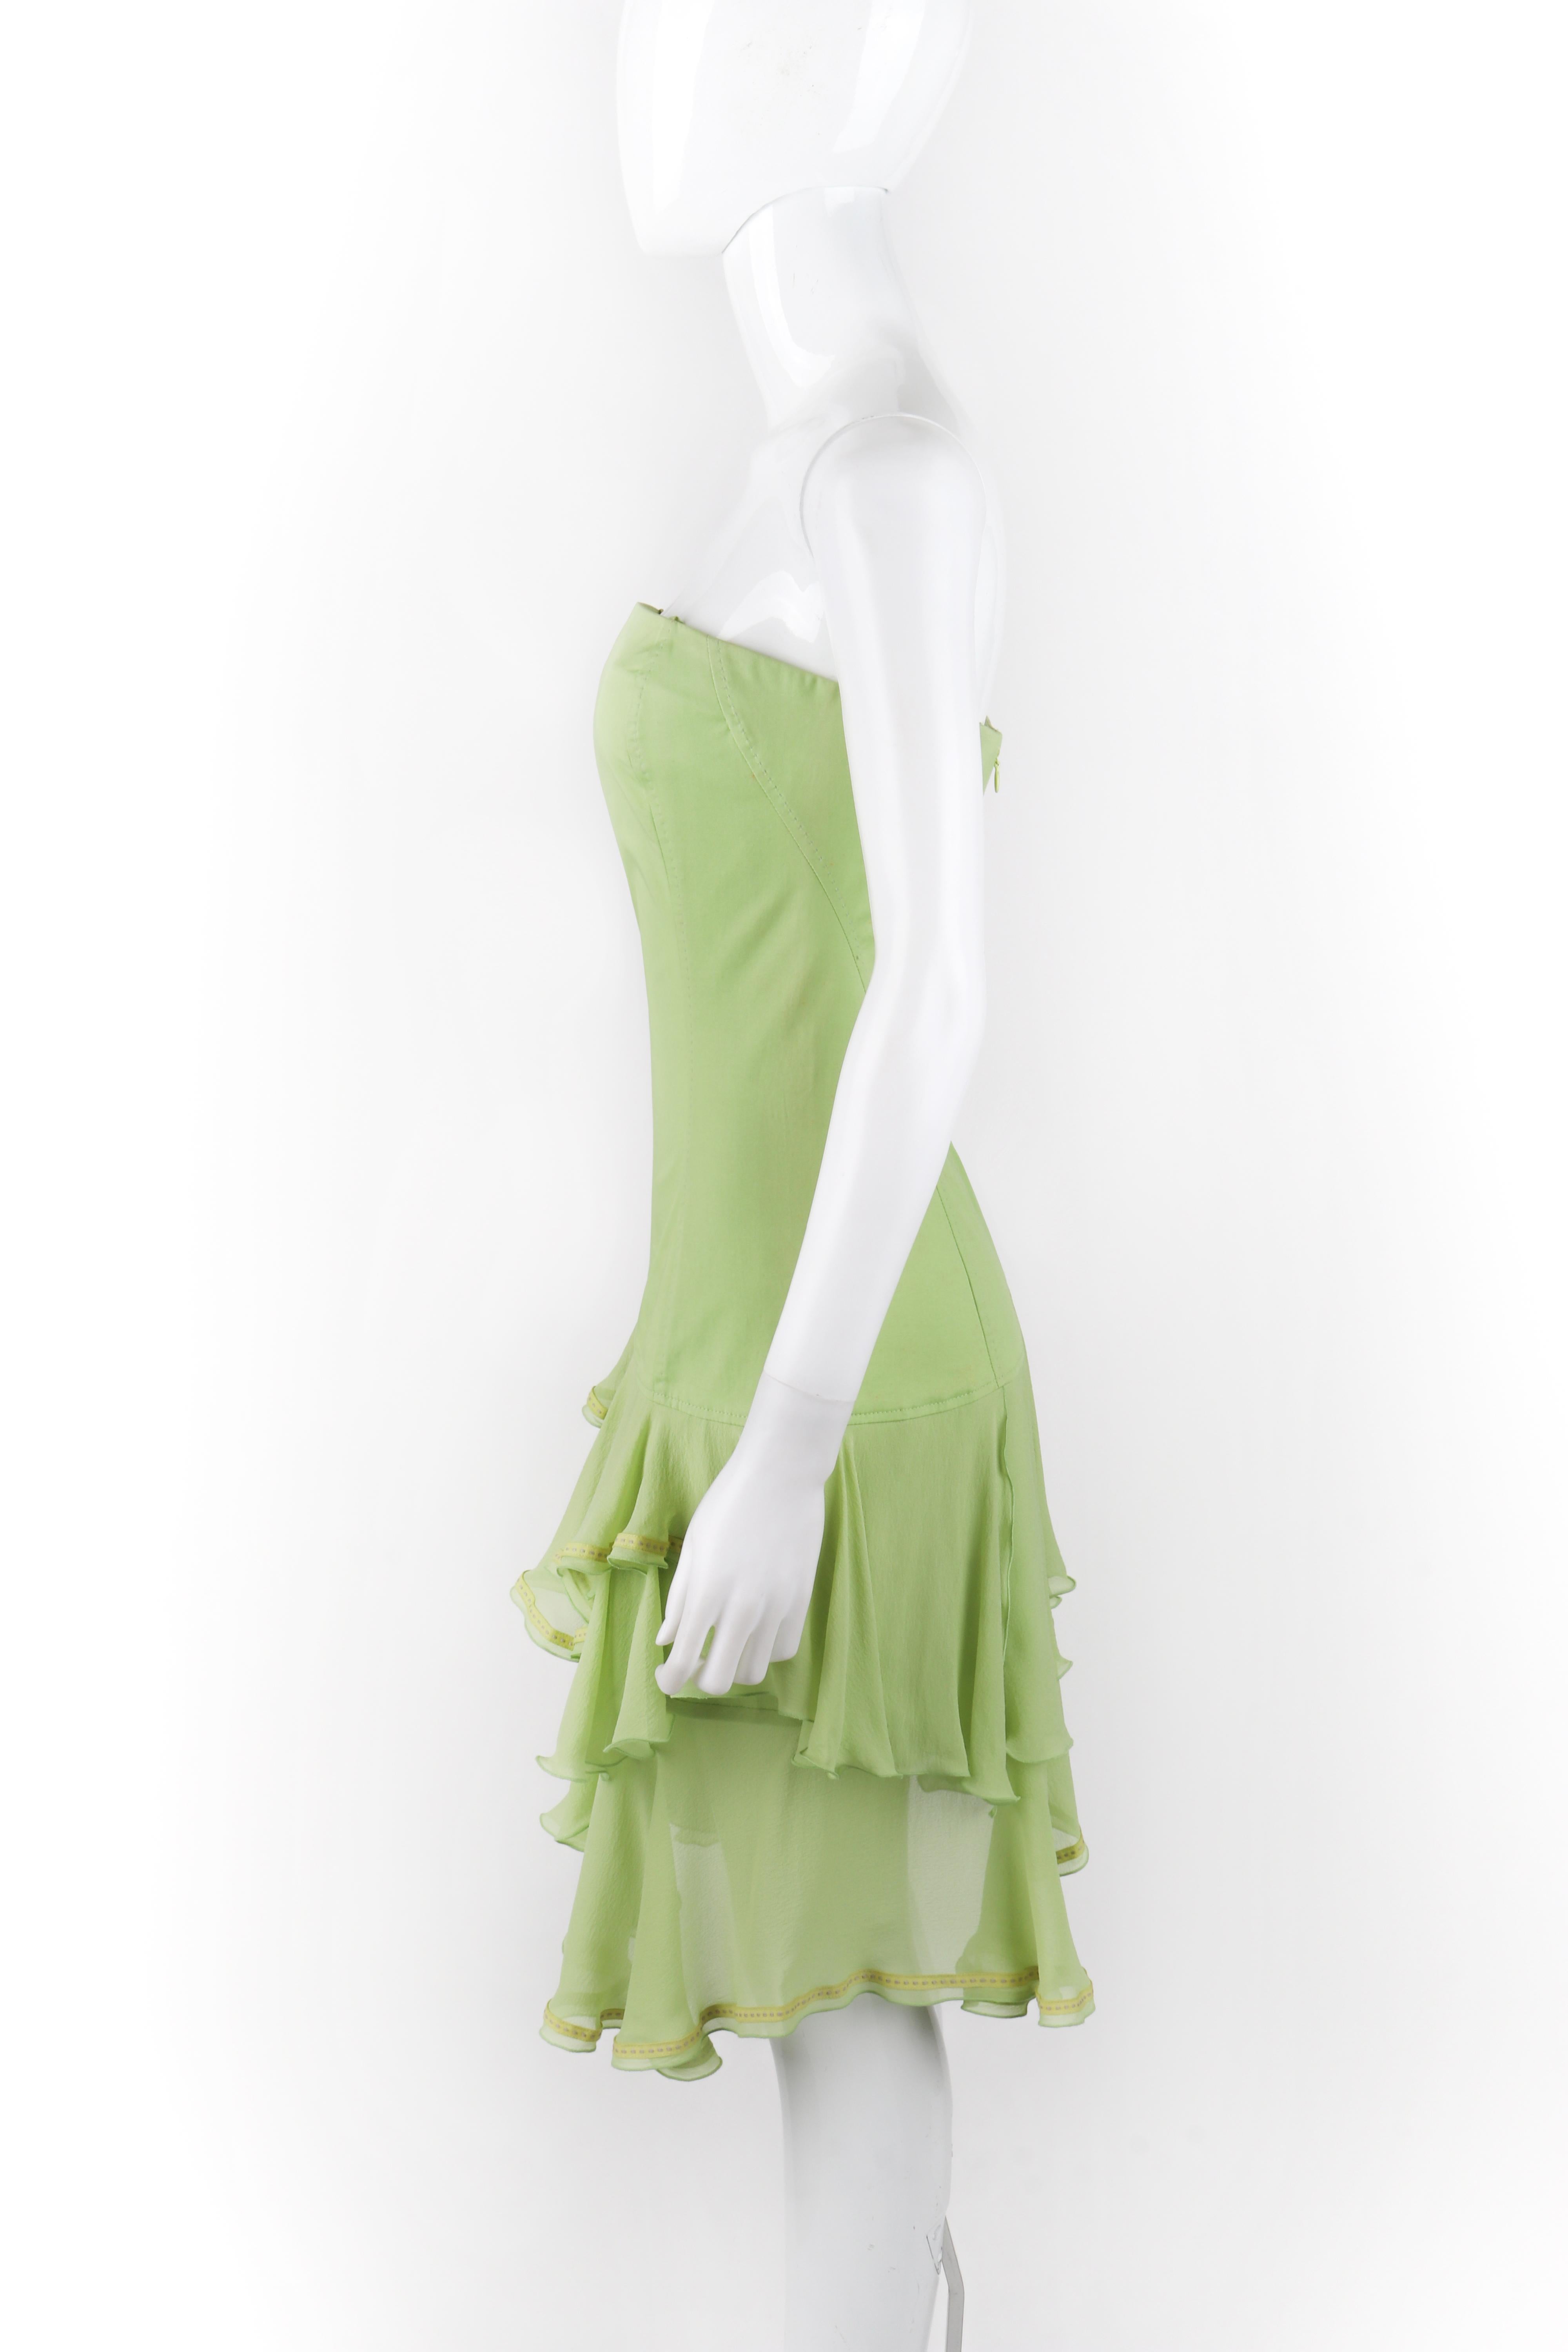 ALEXANDER McQUEEN S/S 1996 “The Hunger” Green Asymmetric Strapless Ruffle Dress In Good Condition For Sale In Thiensville, WI